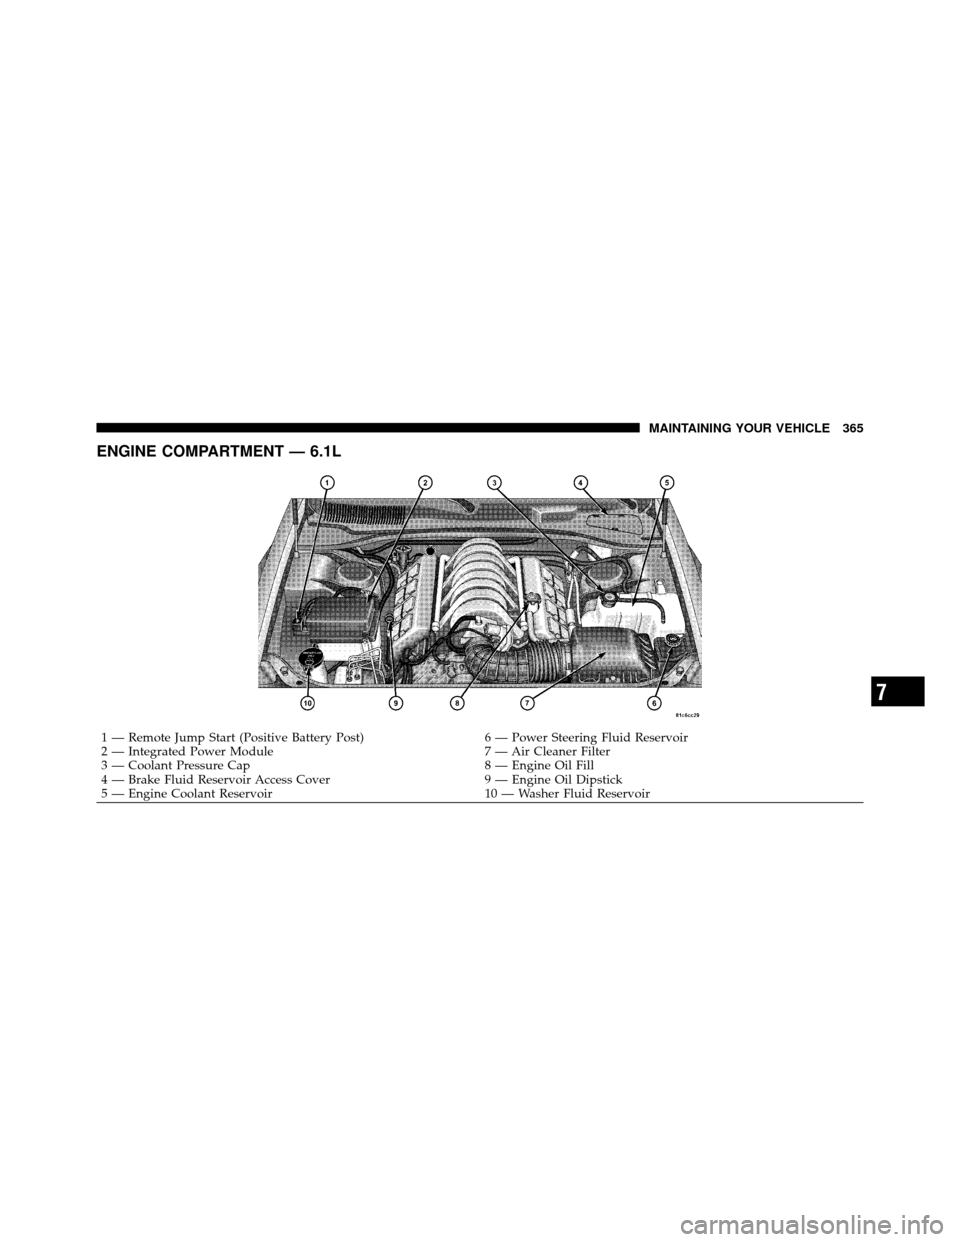 CHRYSLER 300 SRT 2010 1.G Owners Manual ENGINE COMPARTMENT — 6.1L
1 — Remote Jump Start (Positive Battery Post)6 — Power Steering Fluid Reservoir
2 — Integrated Power Module 7 — Air Cleaner Filter
3 — Coolant Pressure Cap 8 — 